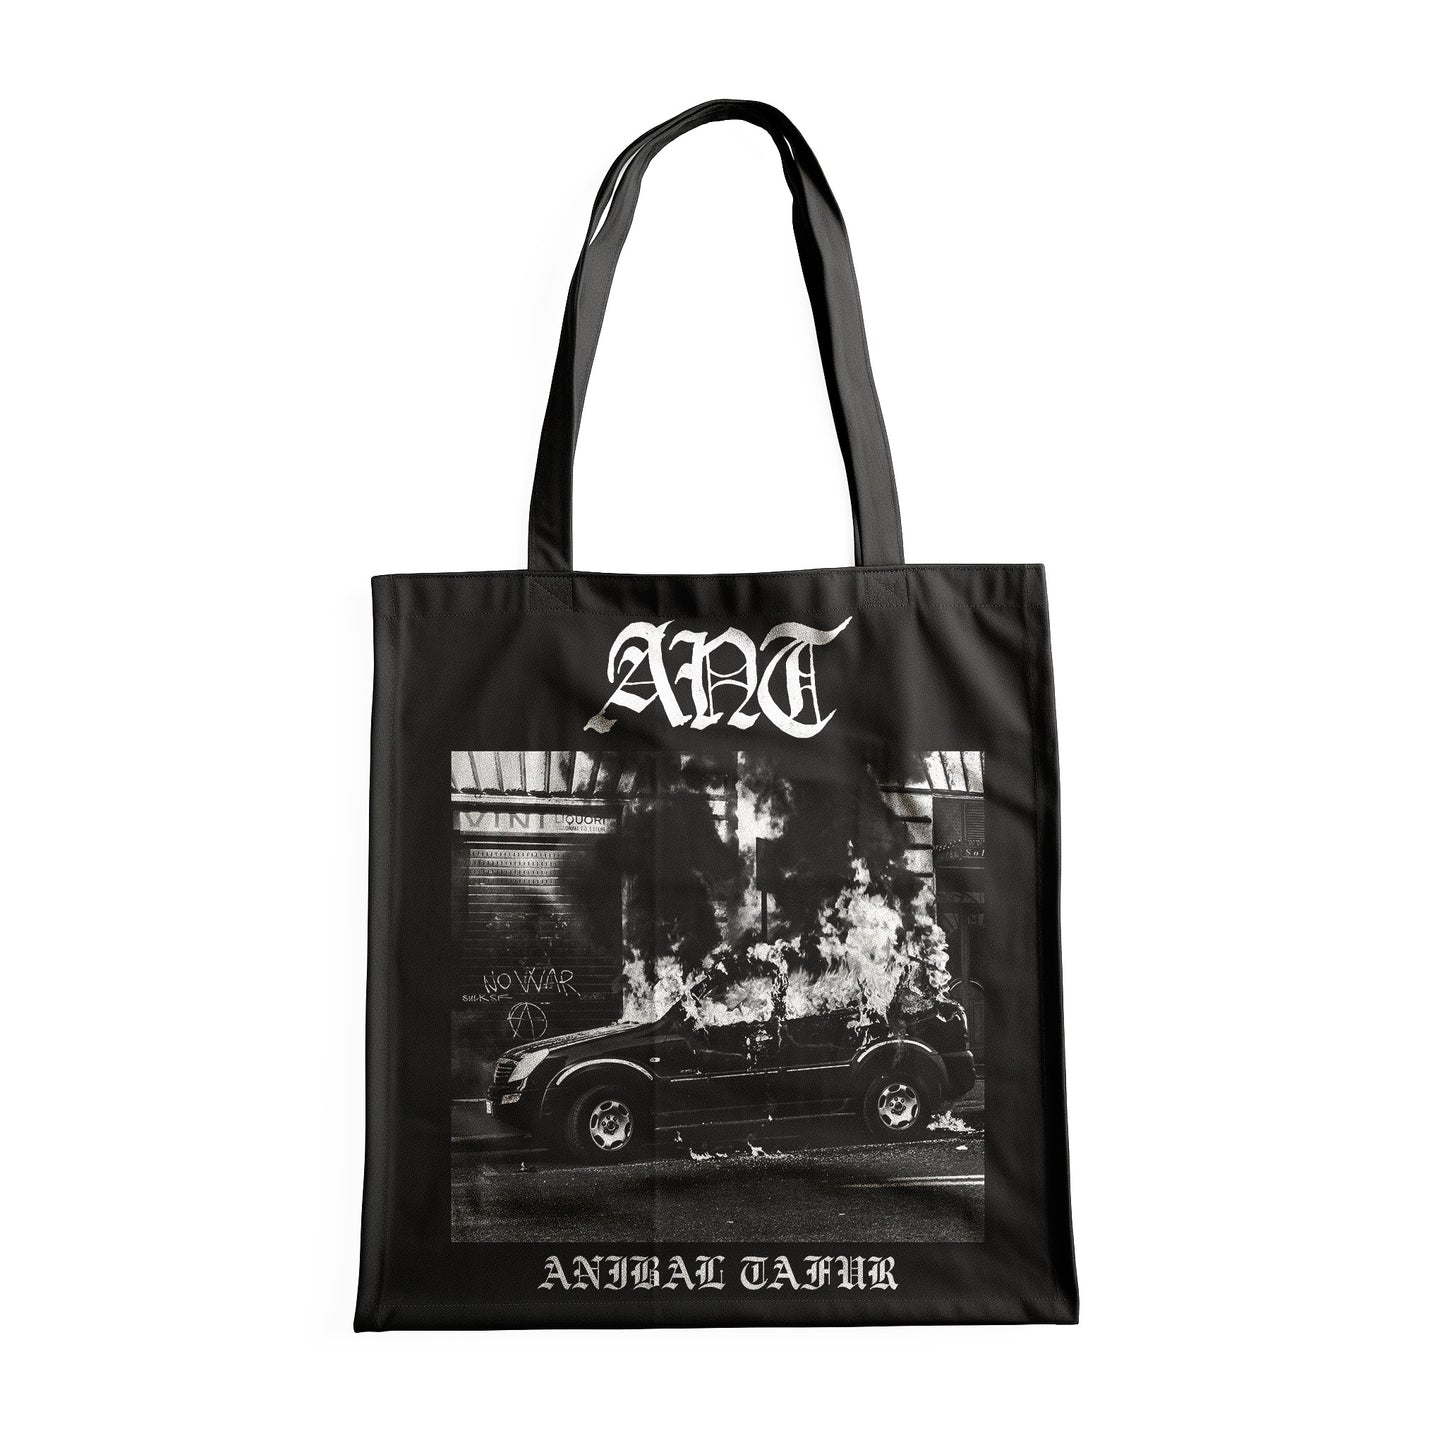 TOTE BAG IN 100% COTTON DRILL AND WATERBASED SCREEPRINTING